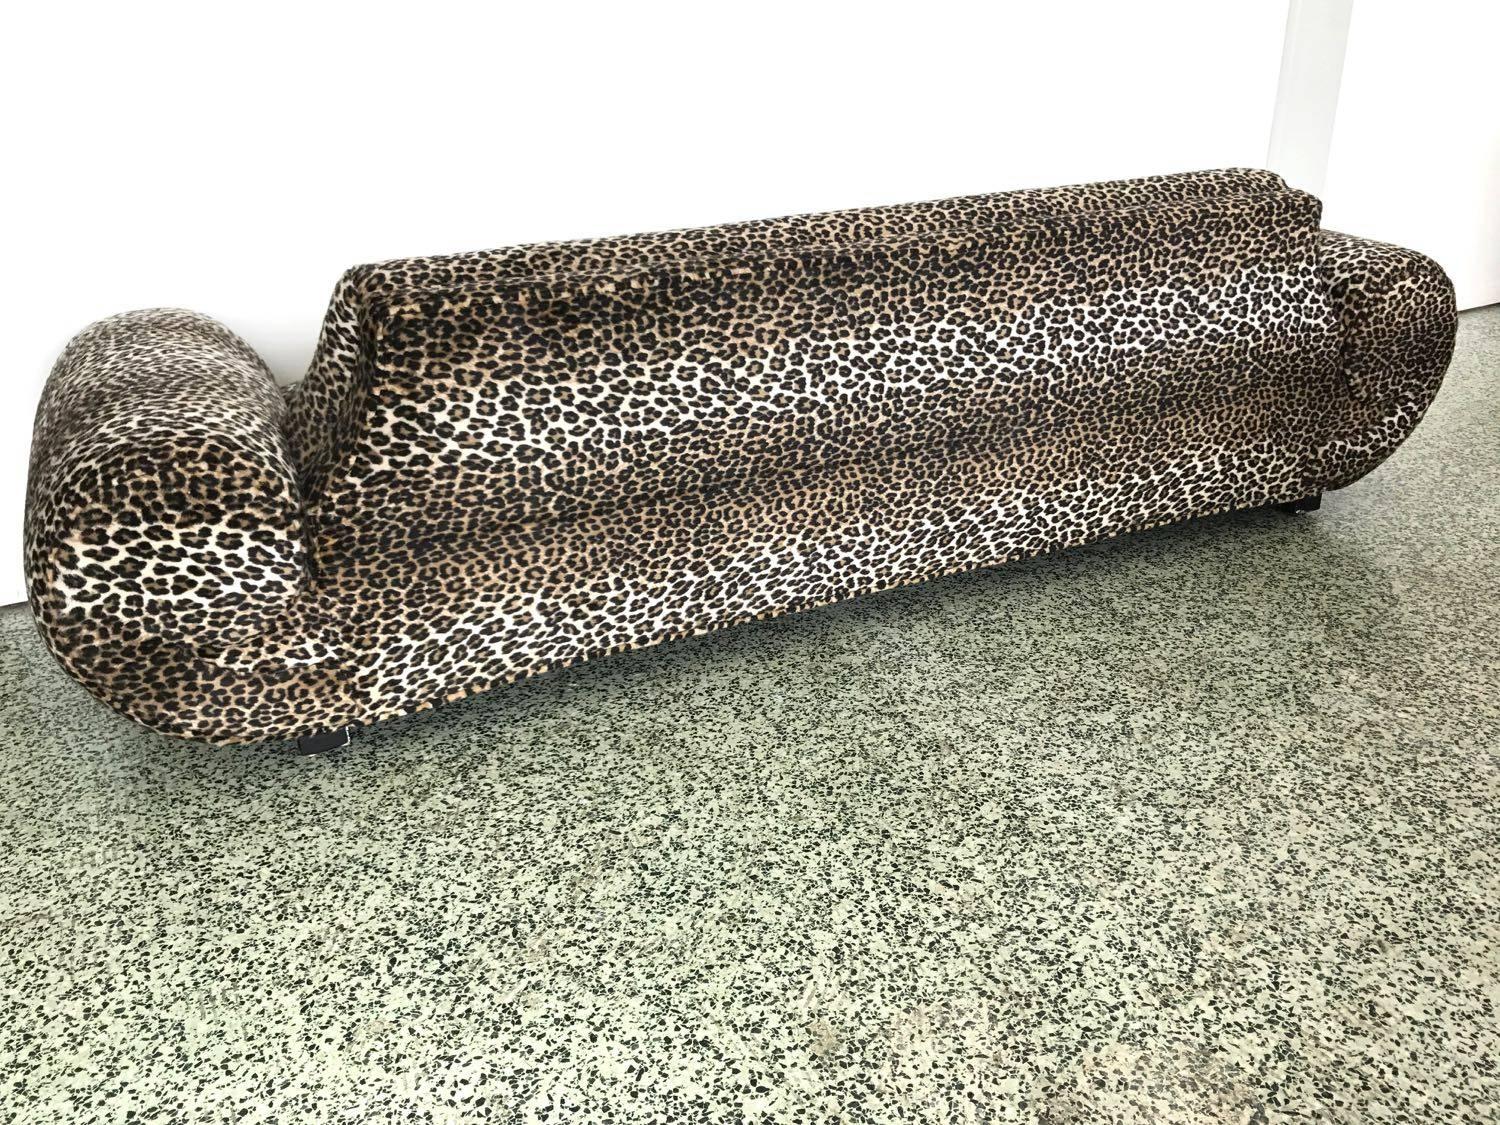 Leopard Print Mid-Century Sofa In Excellent Condition In St. Louis, MO